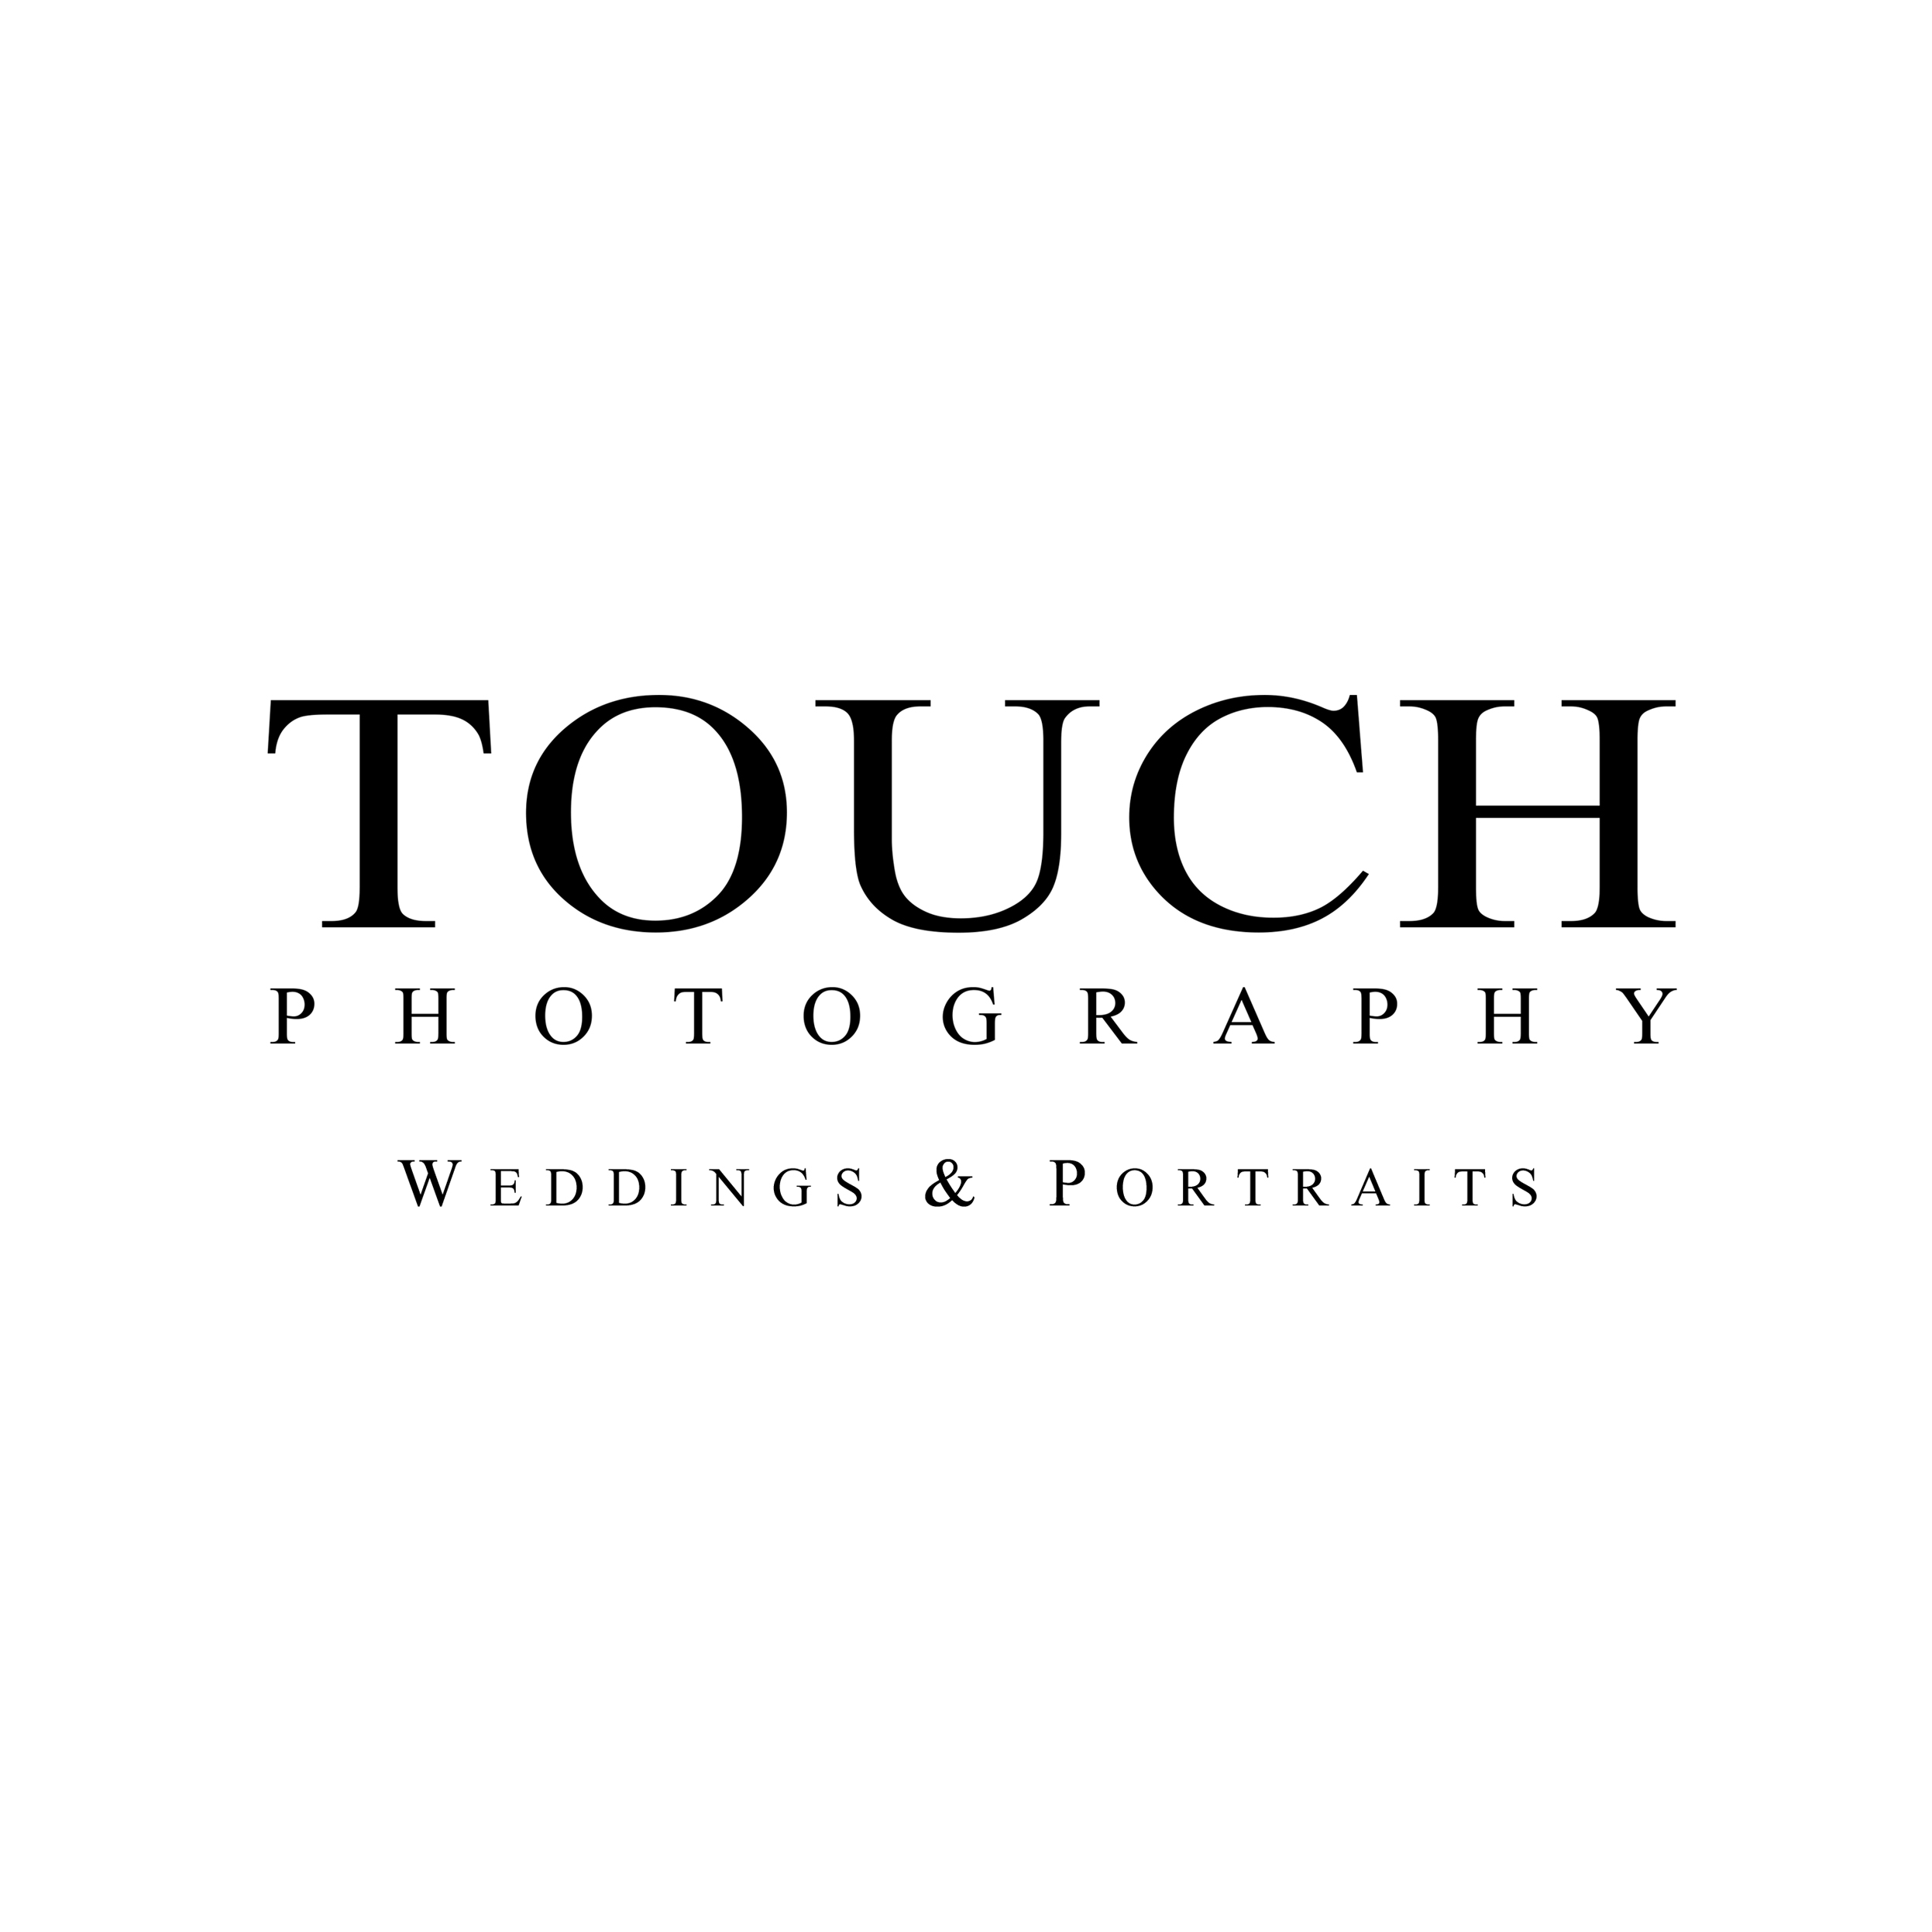 Touch Photography